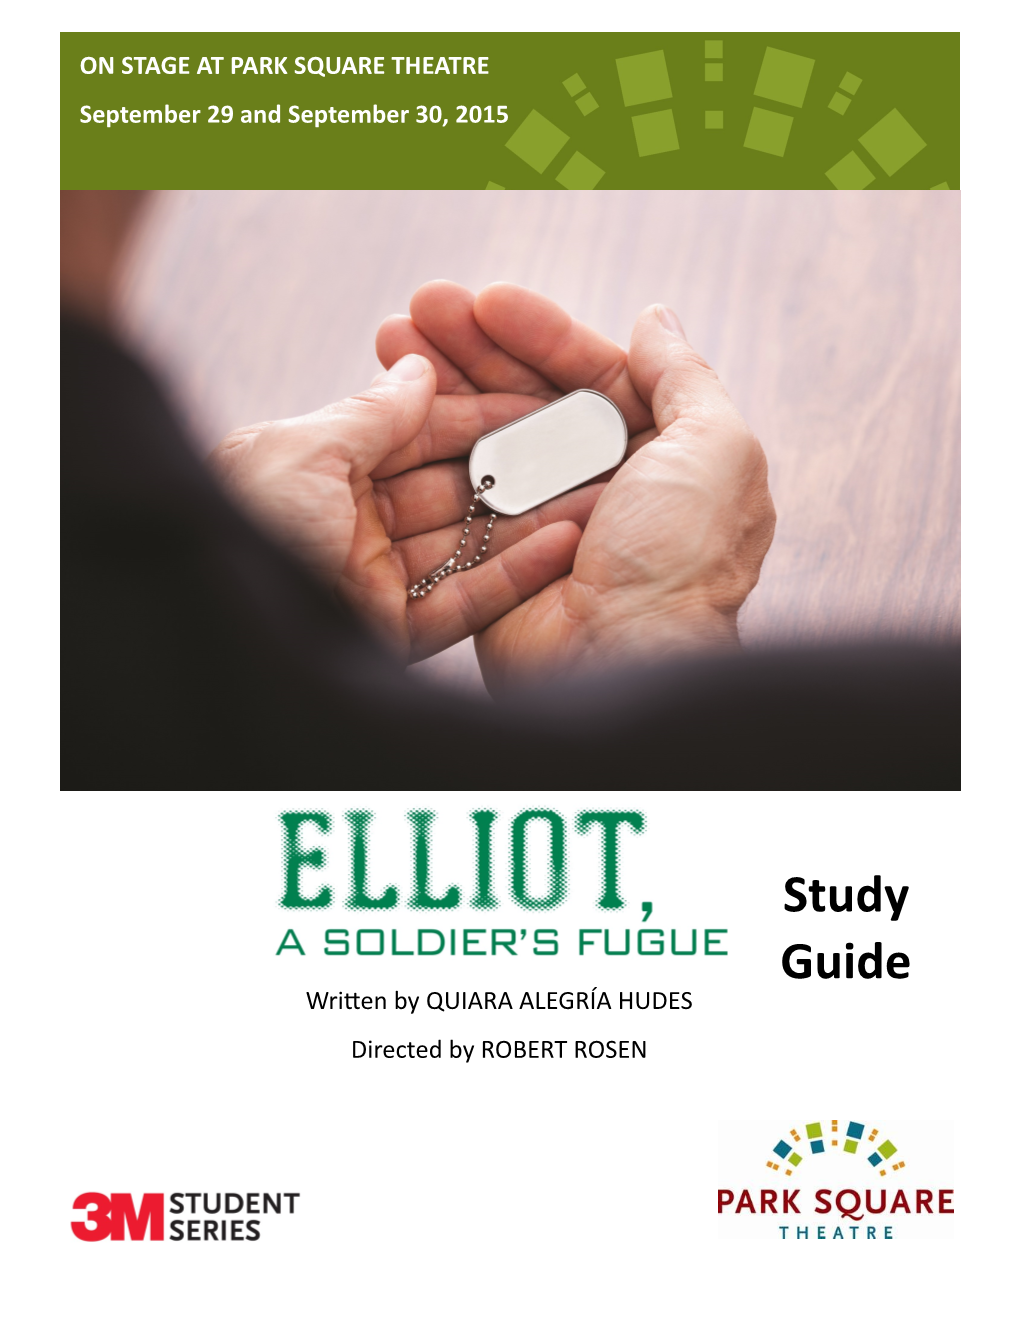 Elliot, a Soldier's Fugue Focusing the Thematic Struc- Ture on Elliot Himself Instead of His Father Or Grandfather? How Is the Play His Fugue?